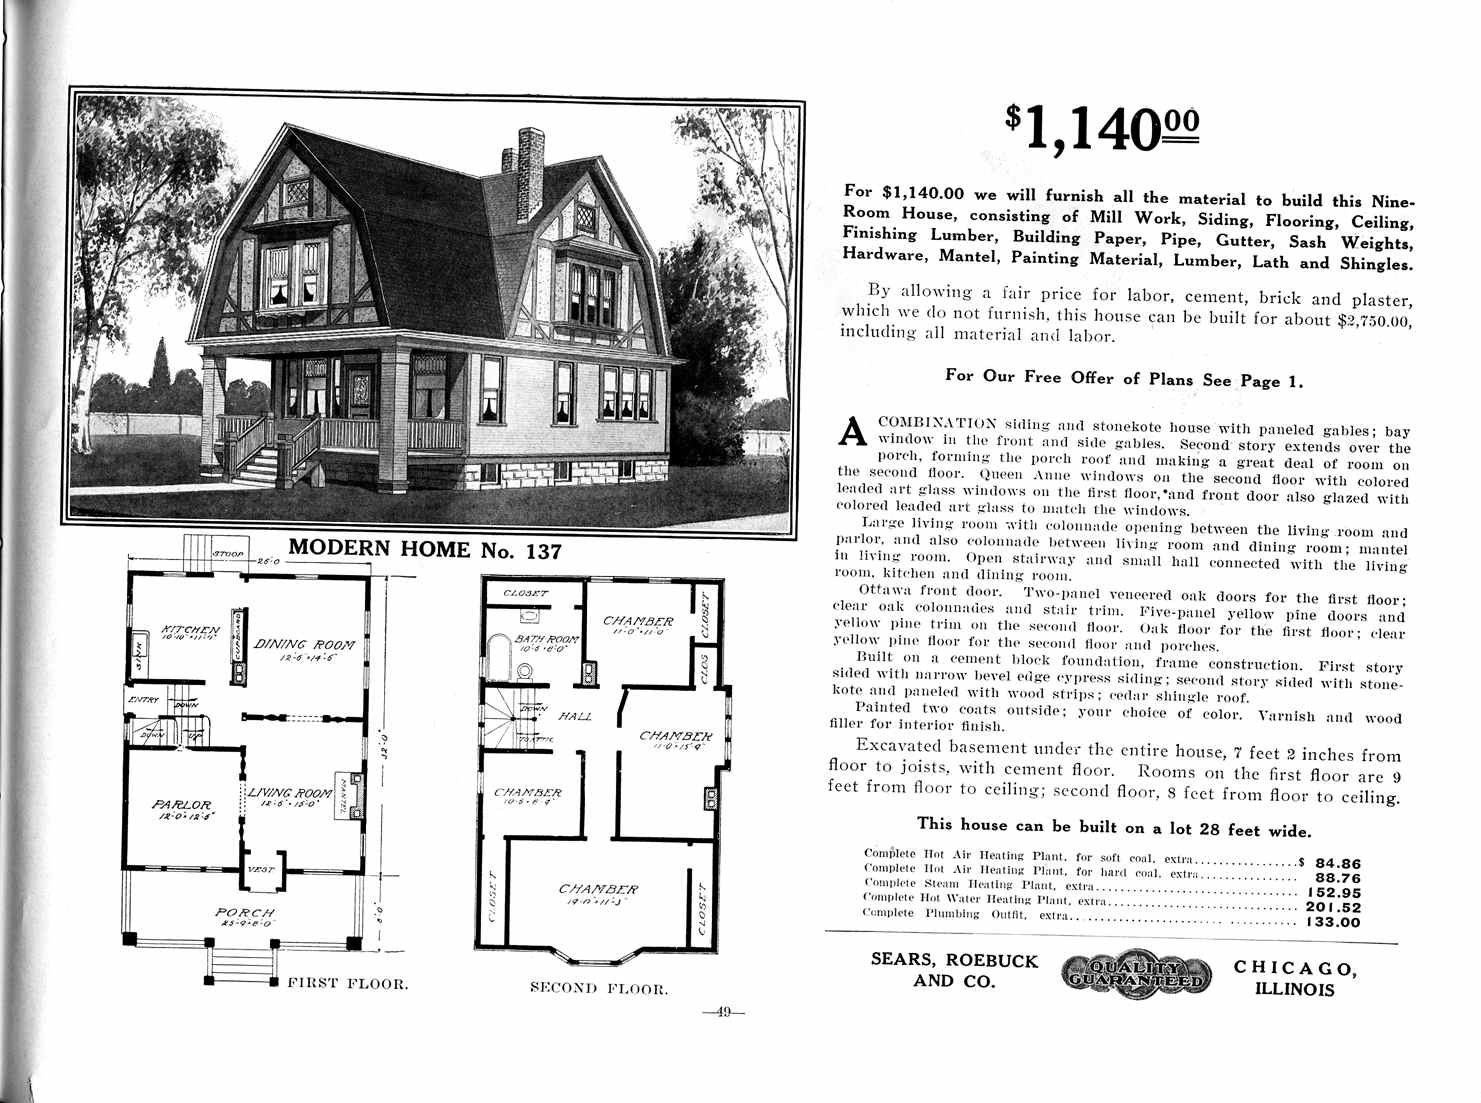 A Brief History of the Sears Catalog Home